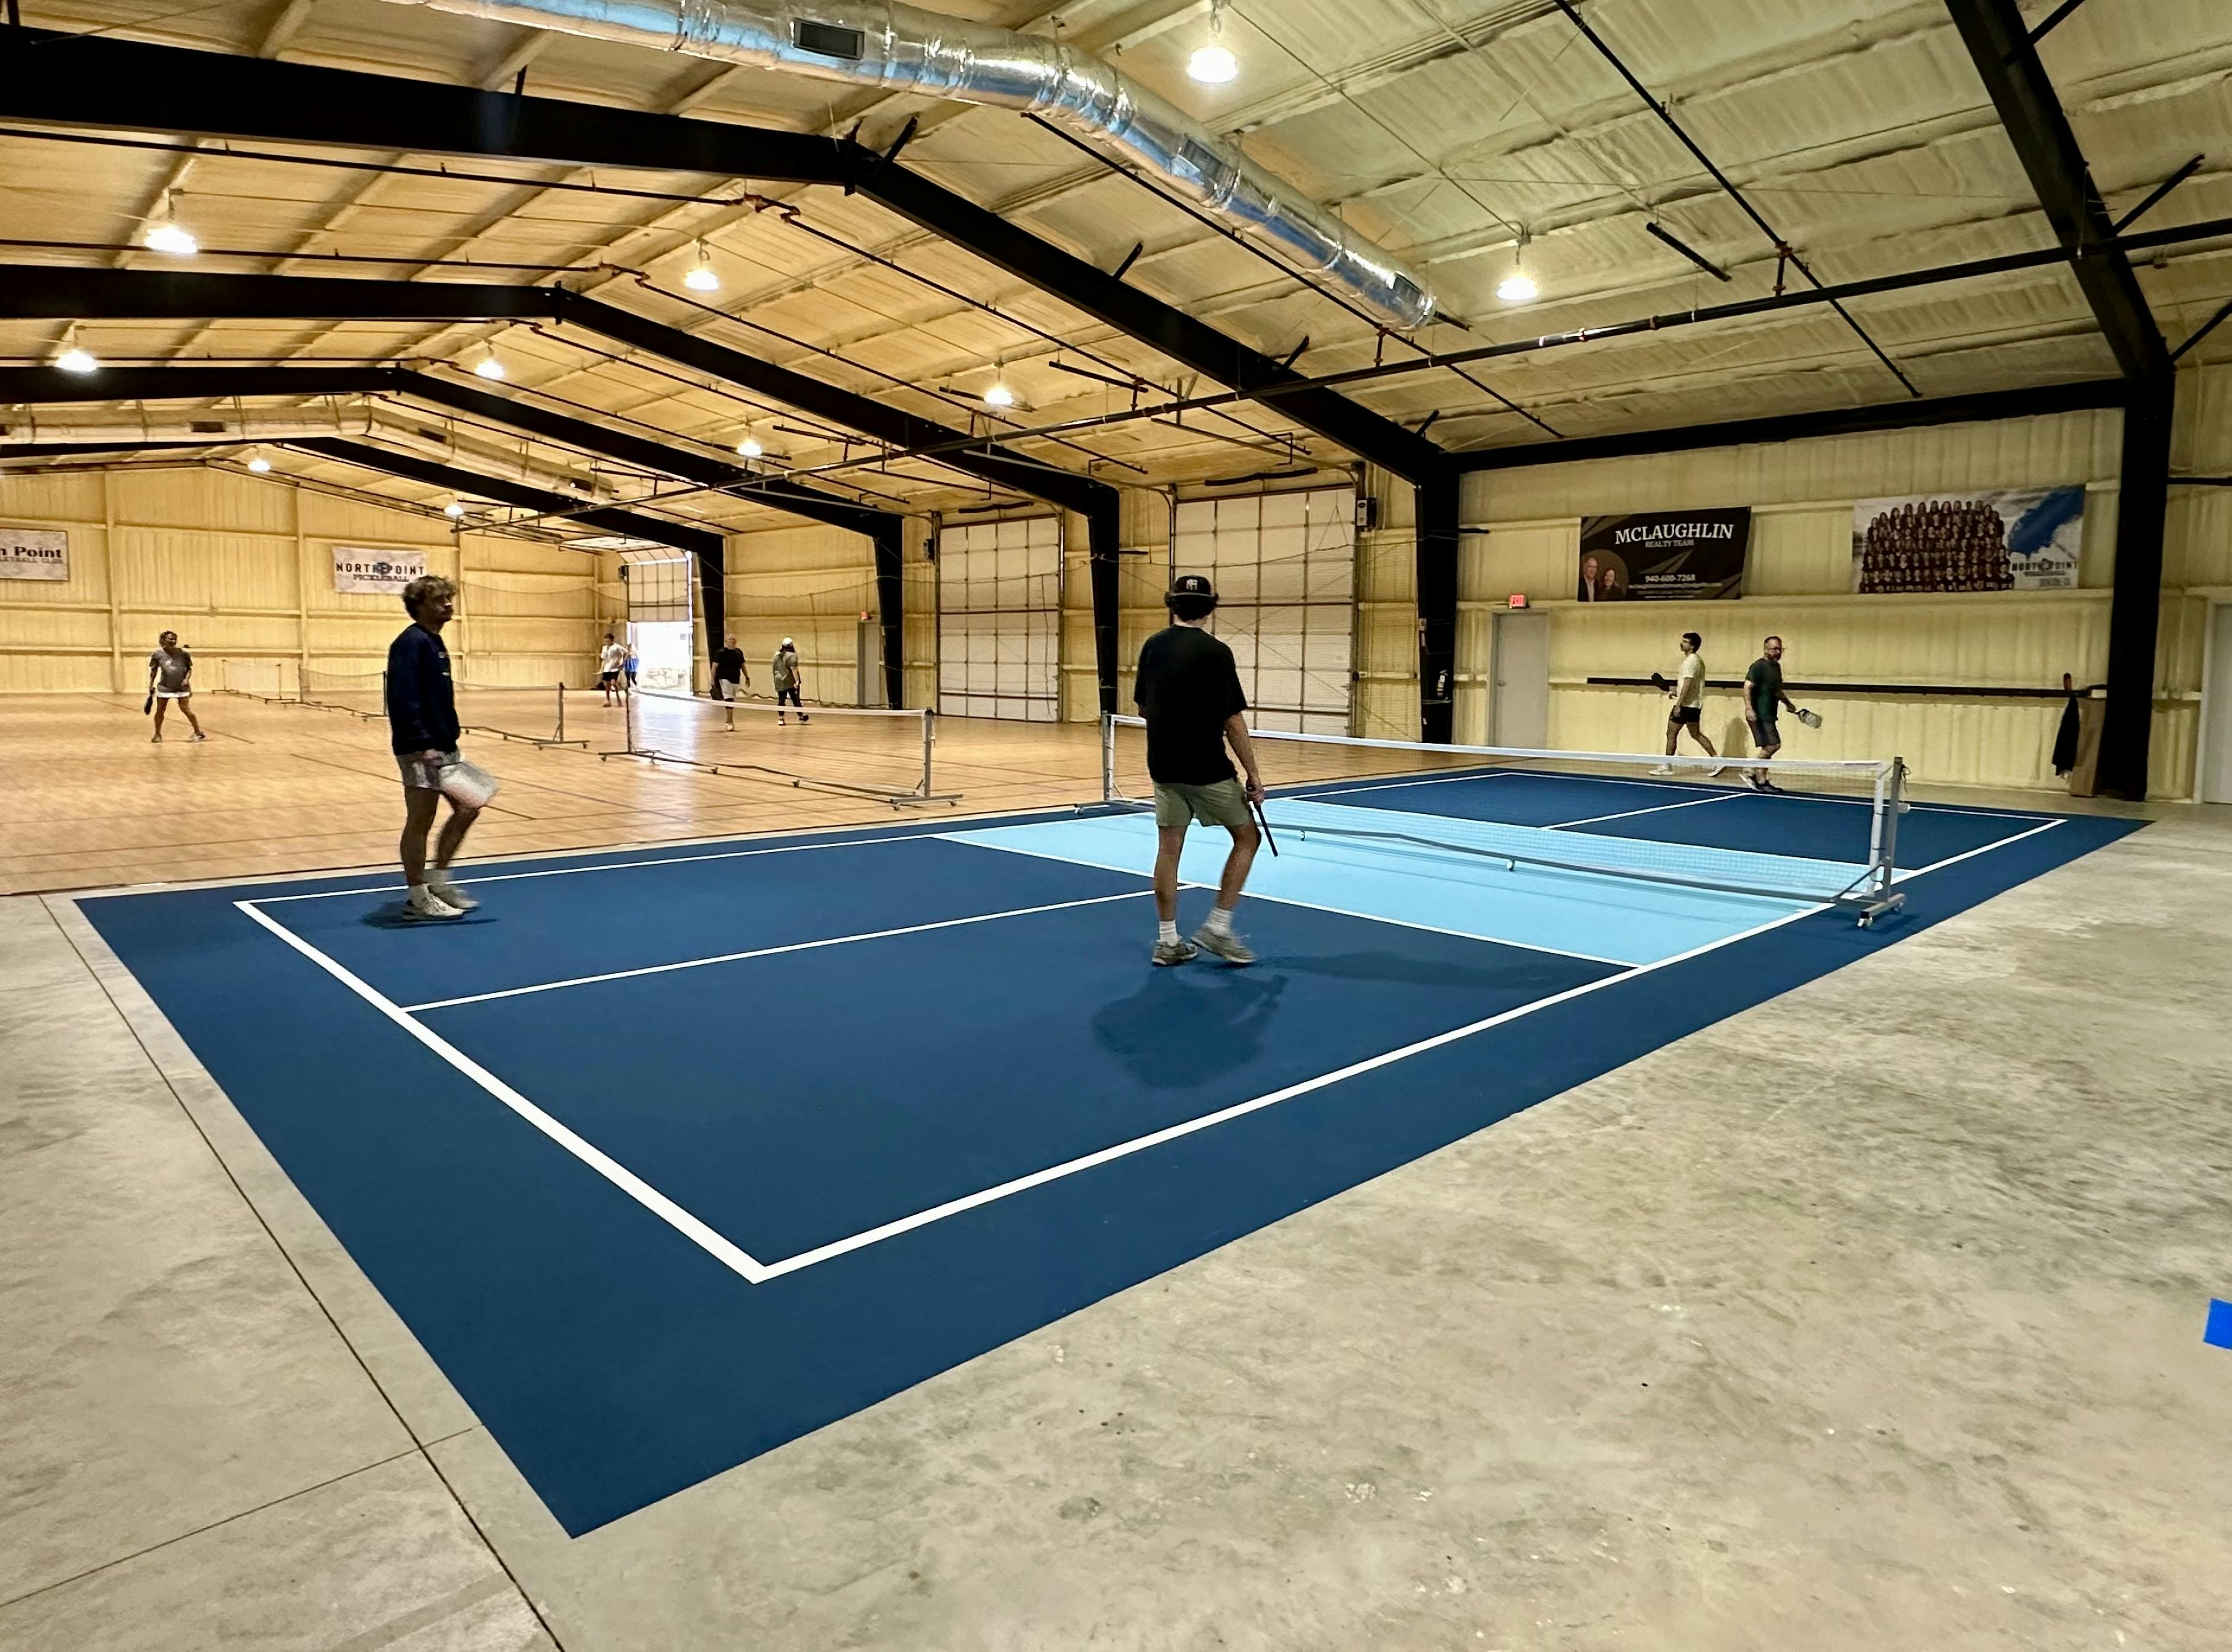 Image 4 of 8 of North Point Pickleball Club court